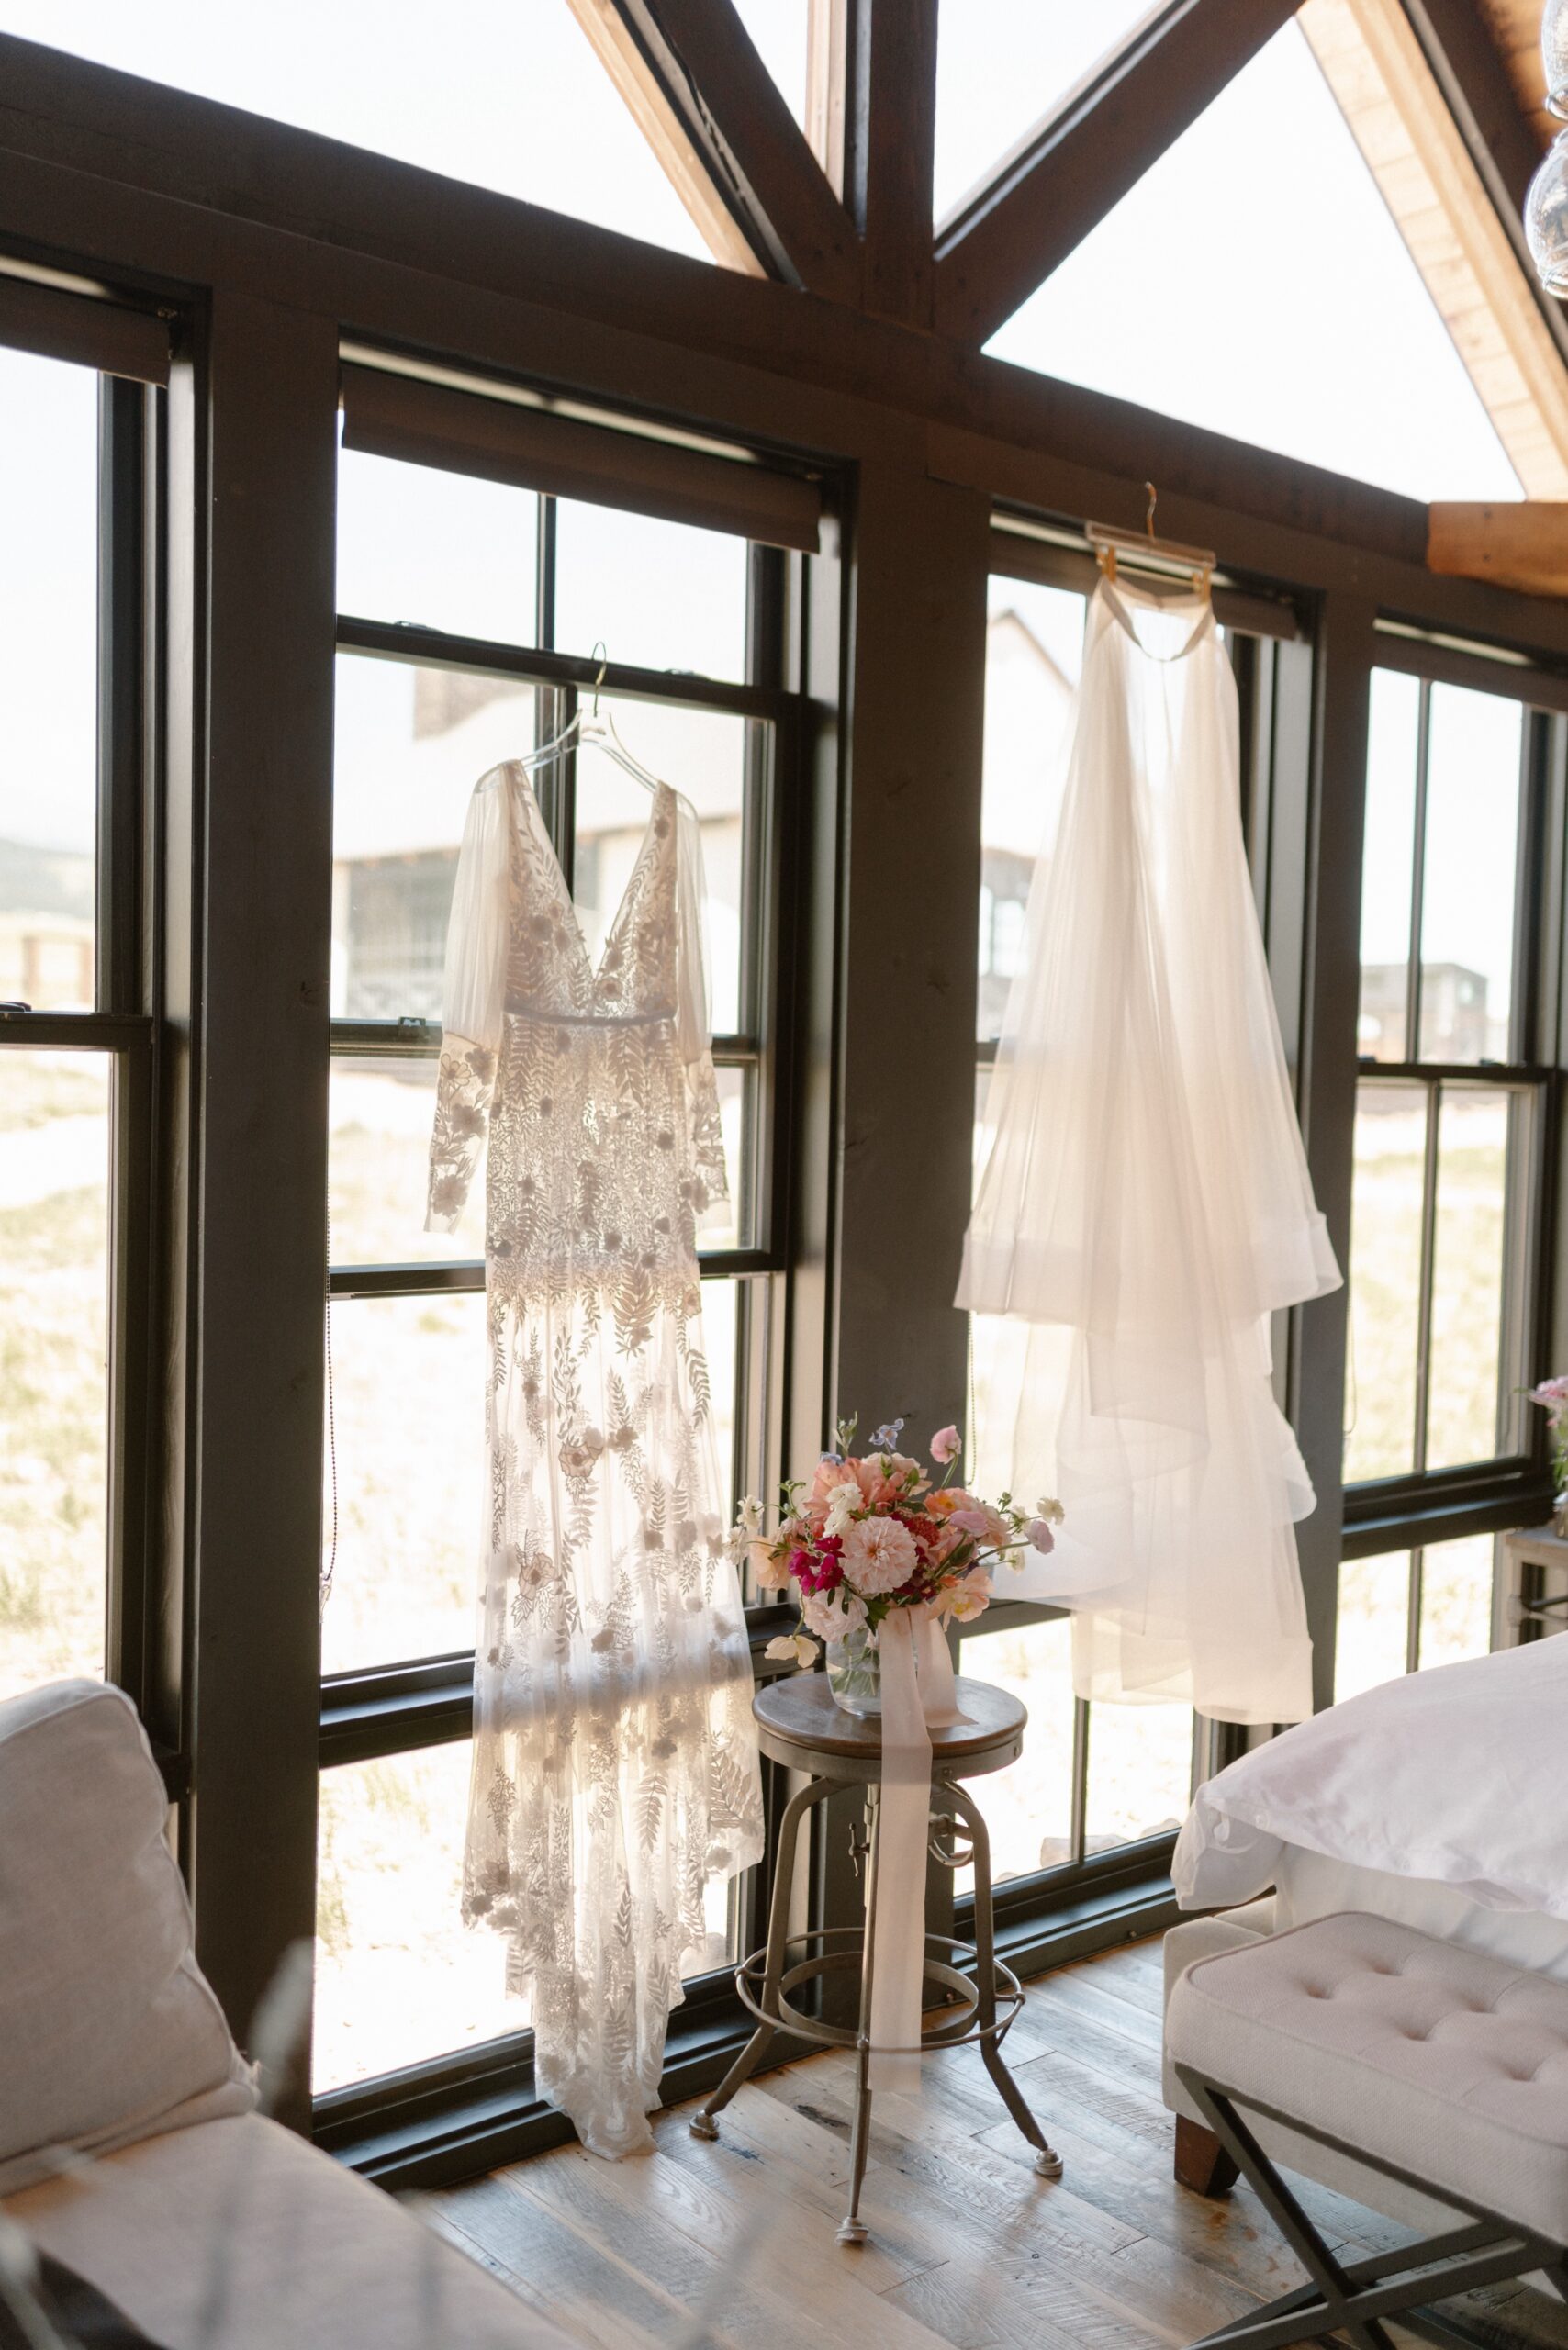 A photo of a bride's dresses hanging on the window sill at Three Peaks ranch. Photo by Ashley Joyce.